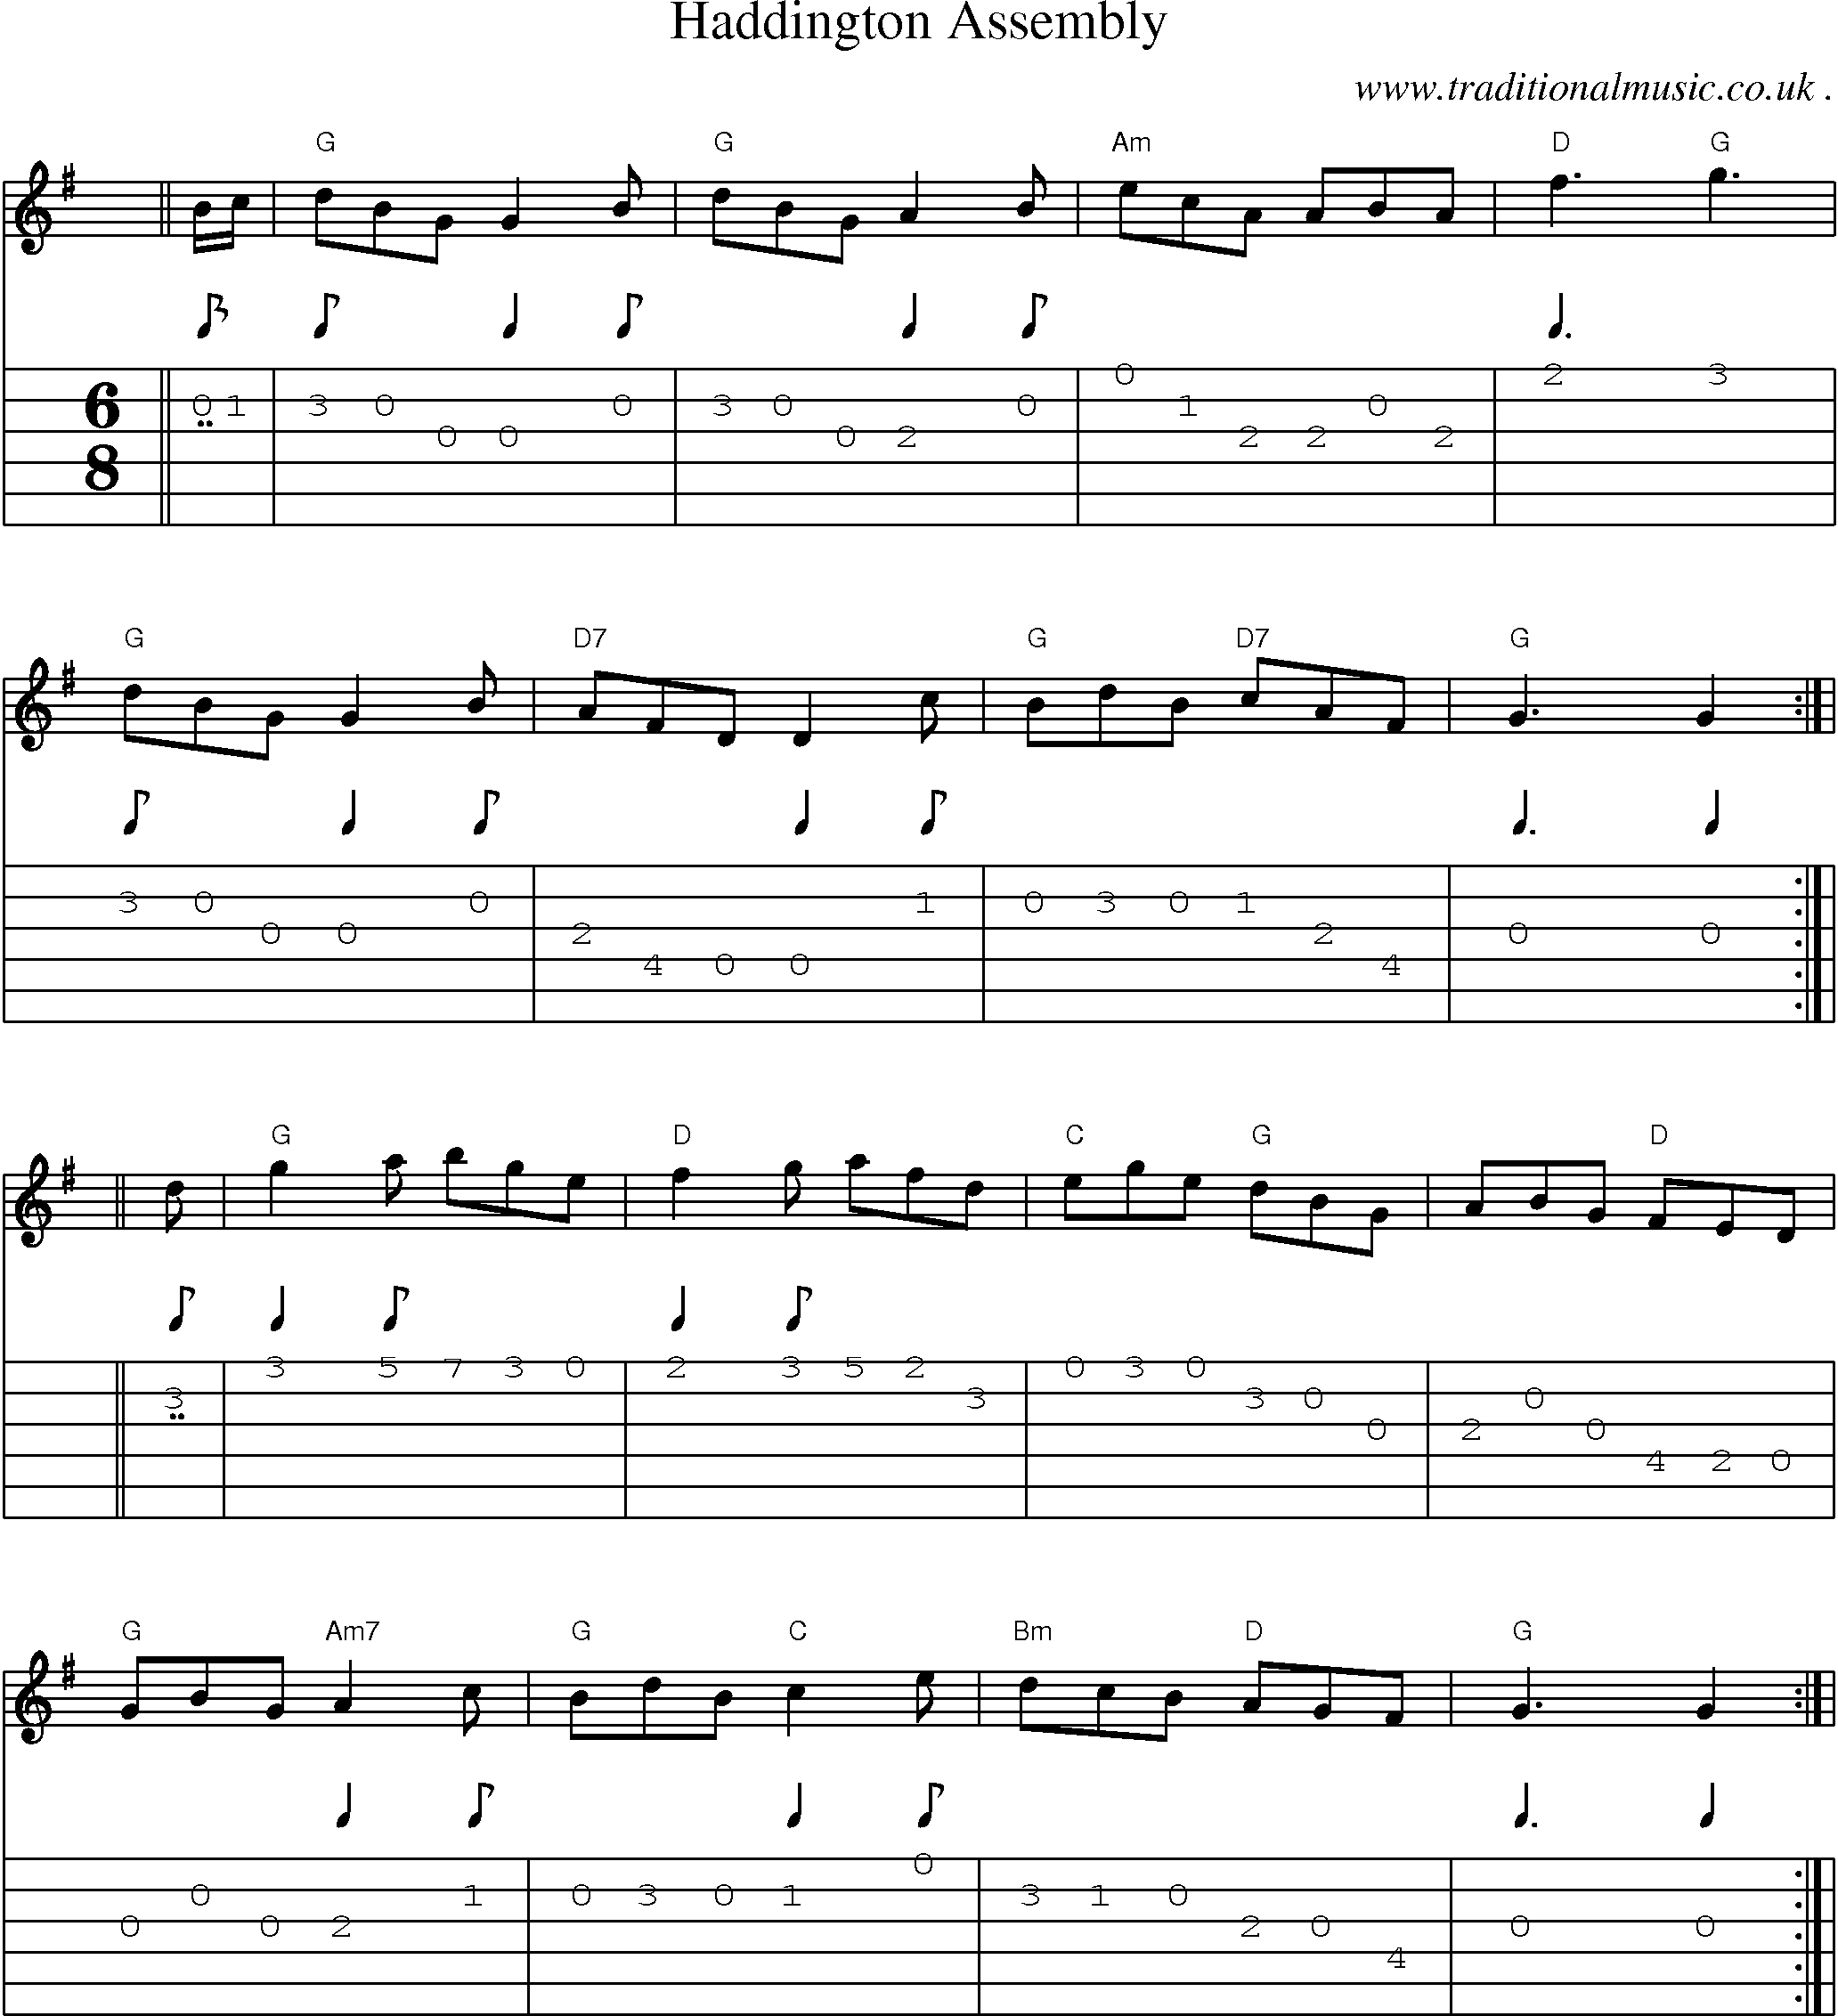 Sheet-music  score, Chords and Guitar Tabs for Haddington Assembly